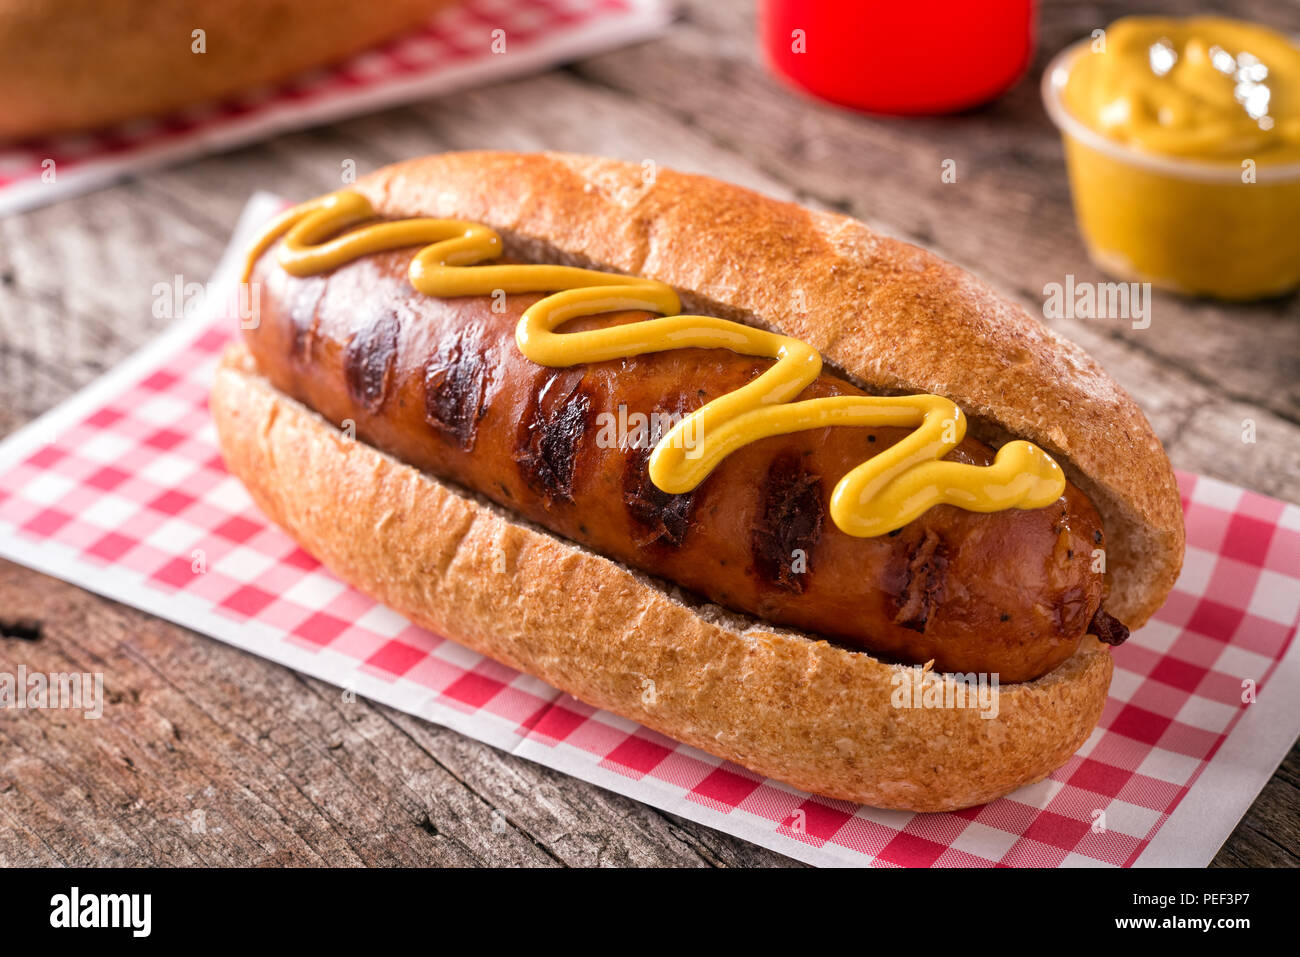 A delicious grilled smoked sausage on a roll with yellow mustard. Stock Photo